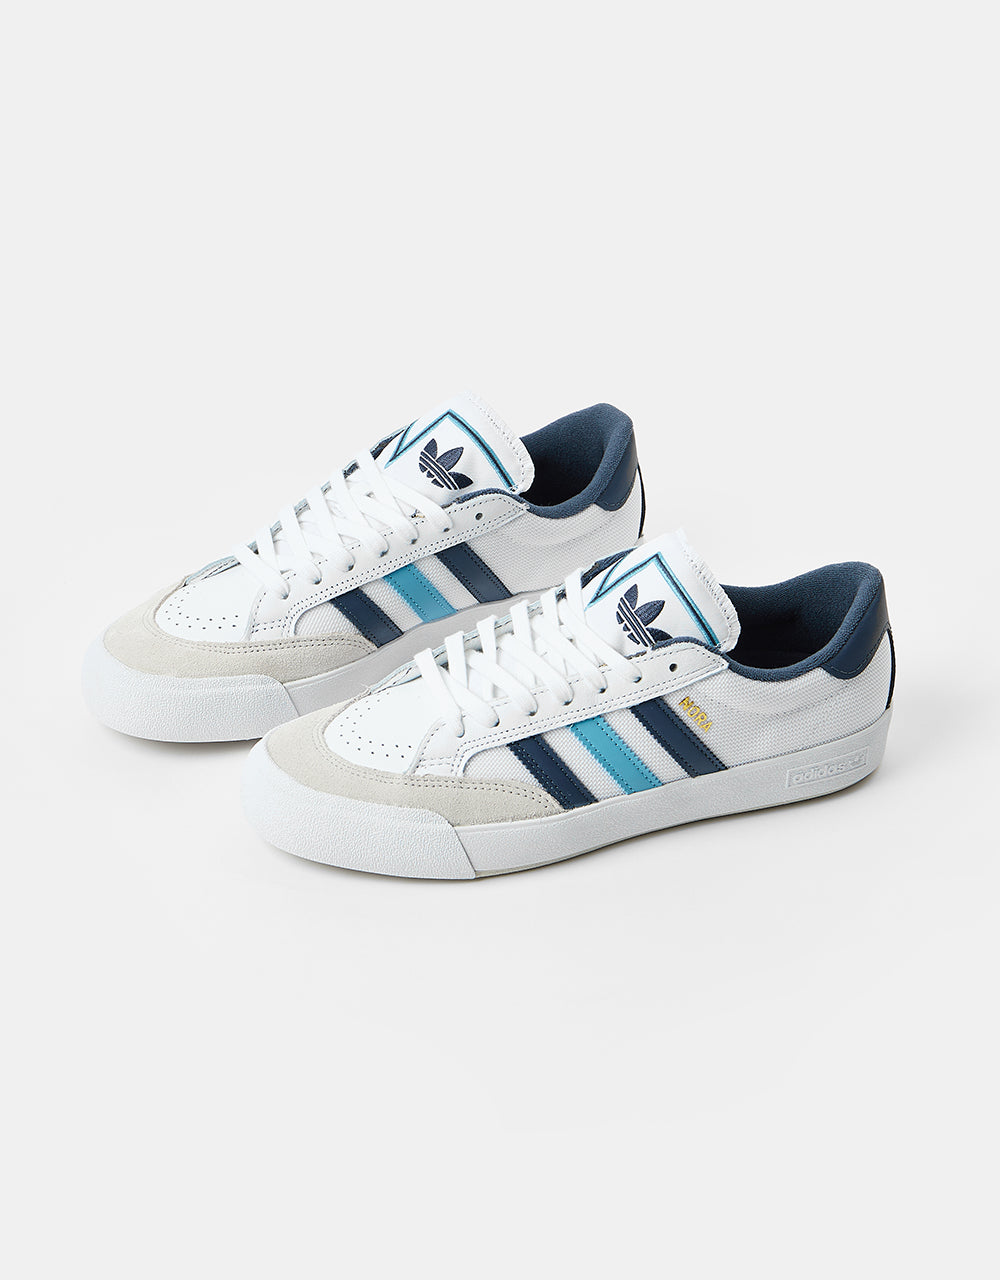 adidas Nora Skate Shoes - White/Preloved Blue/Shadow Navy